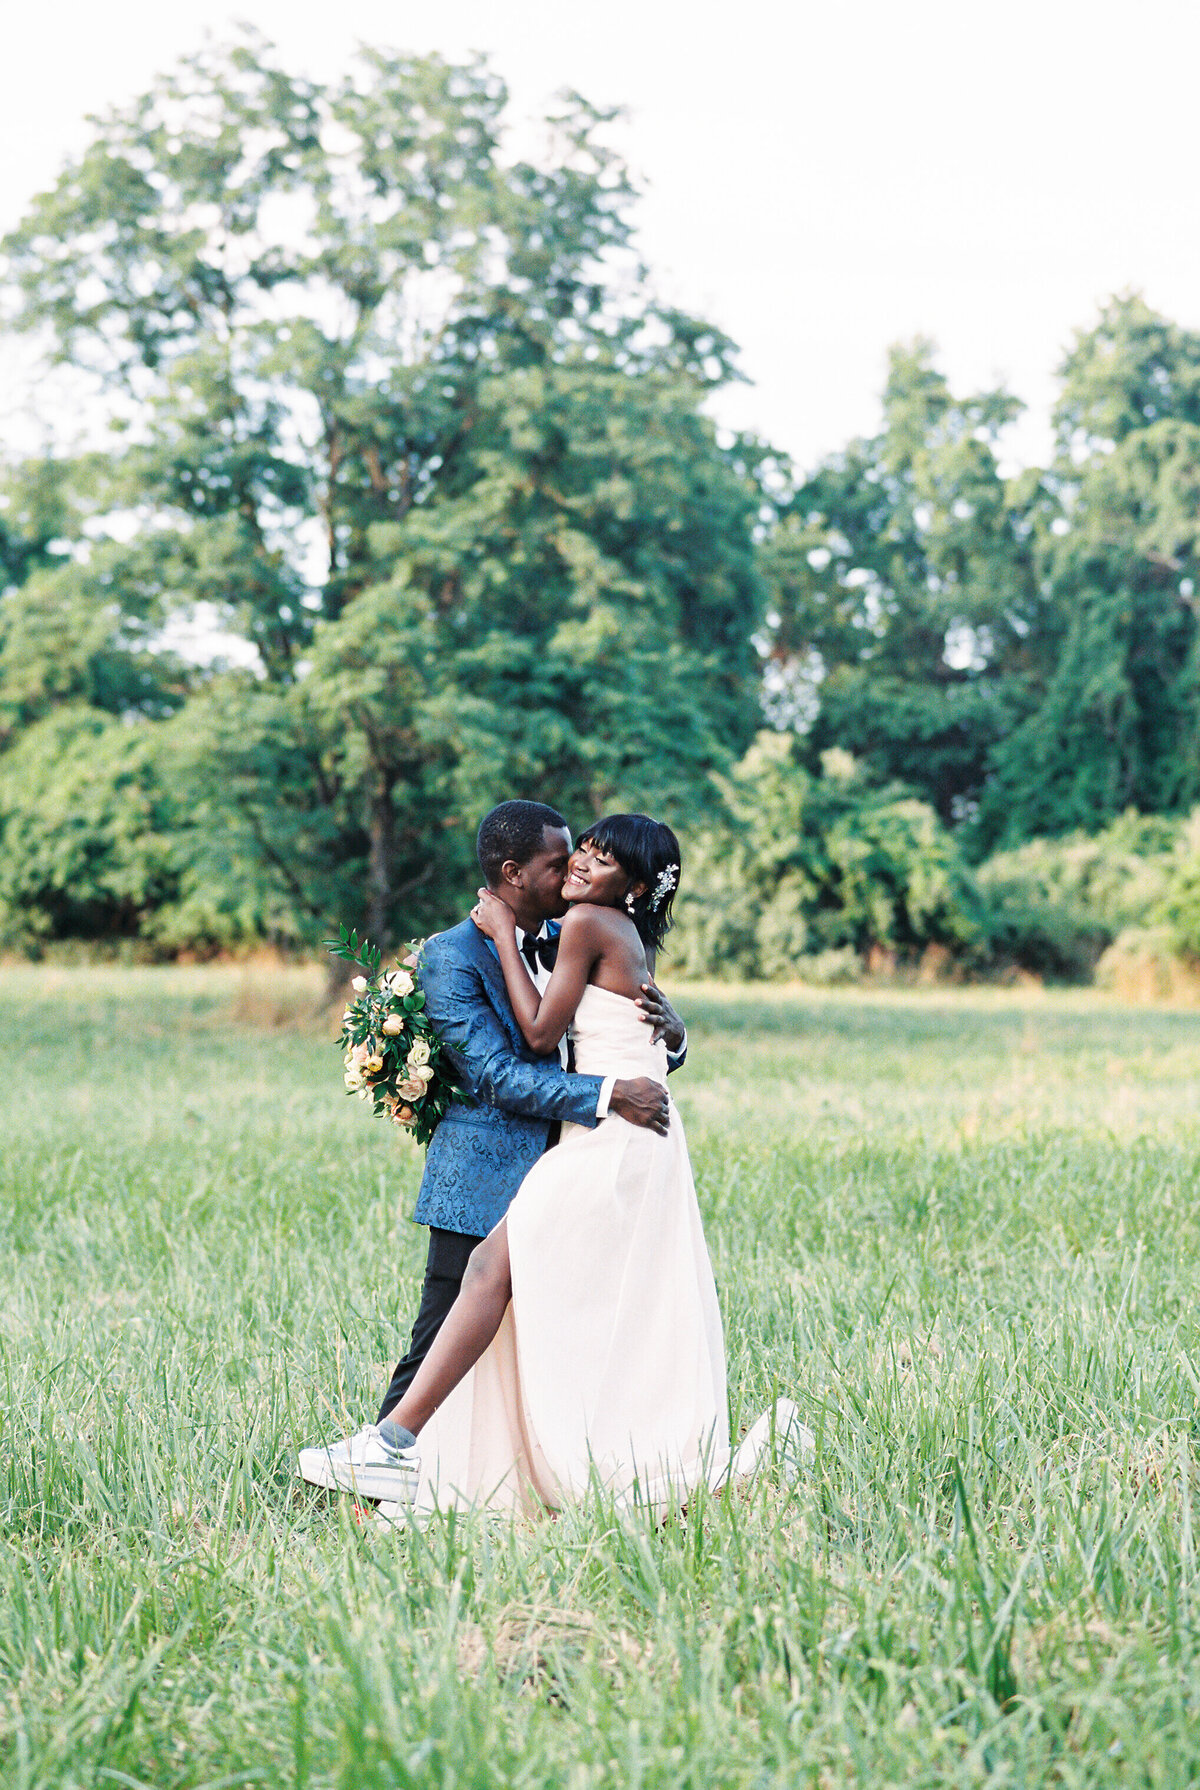 A bride and groom on a field after their wedding.